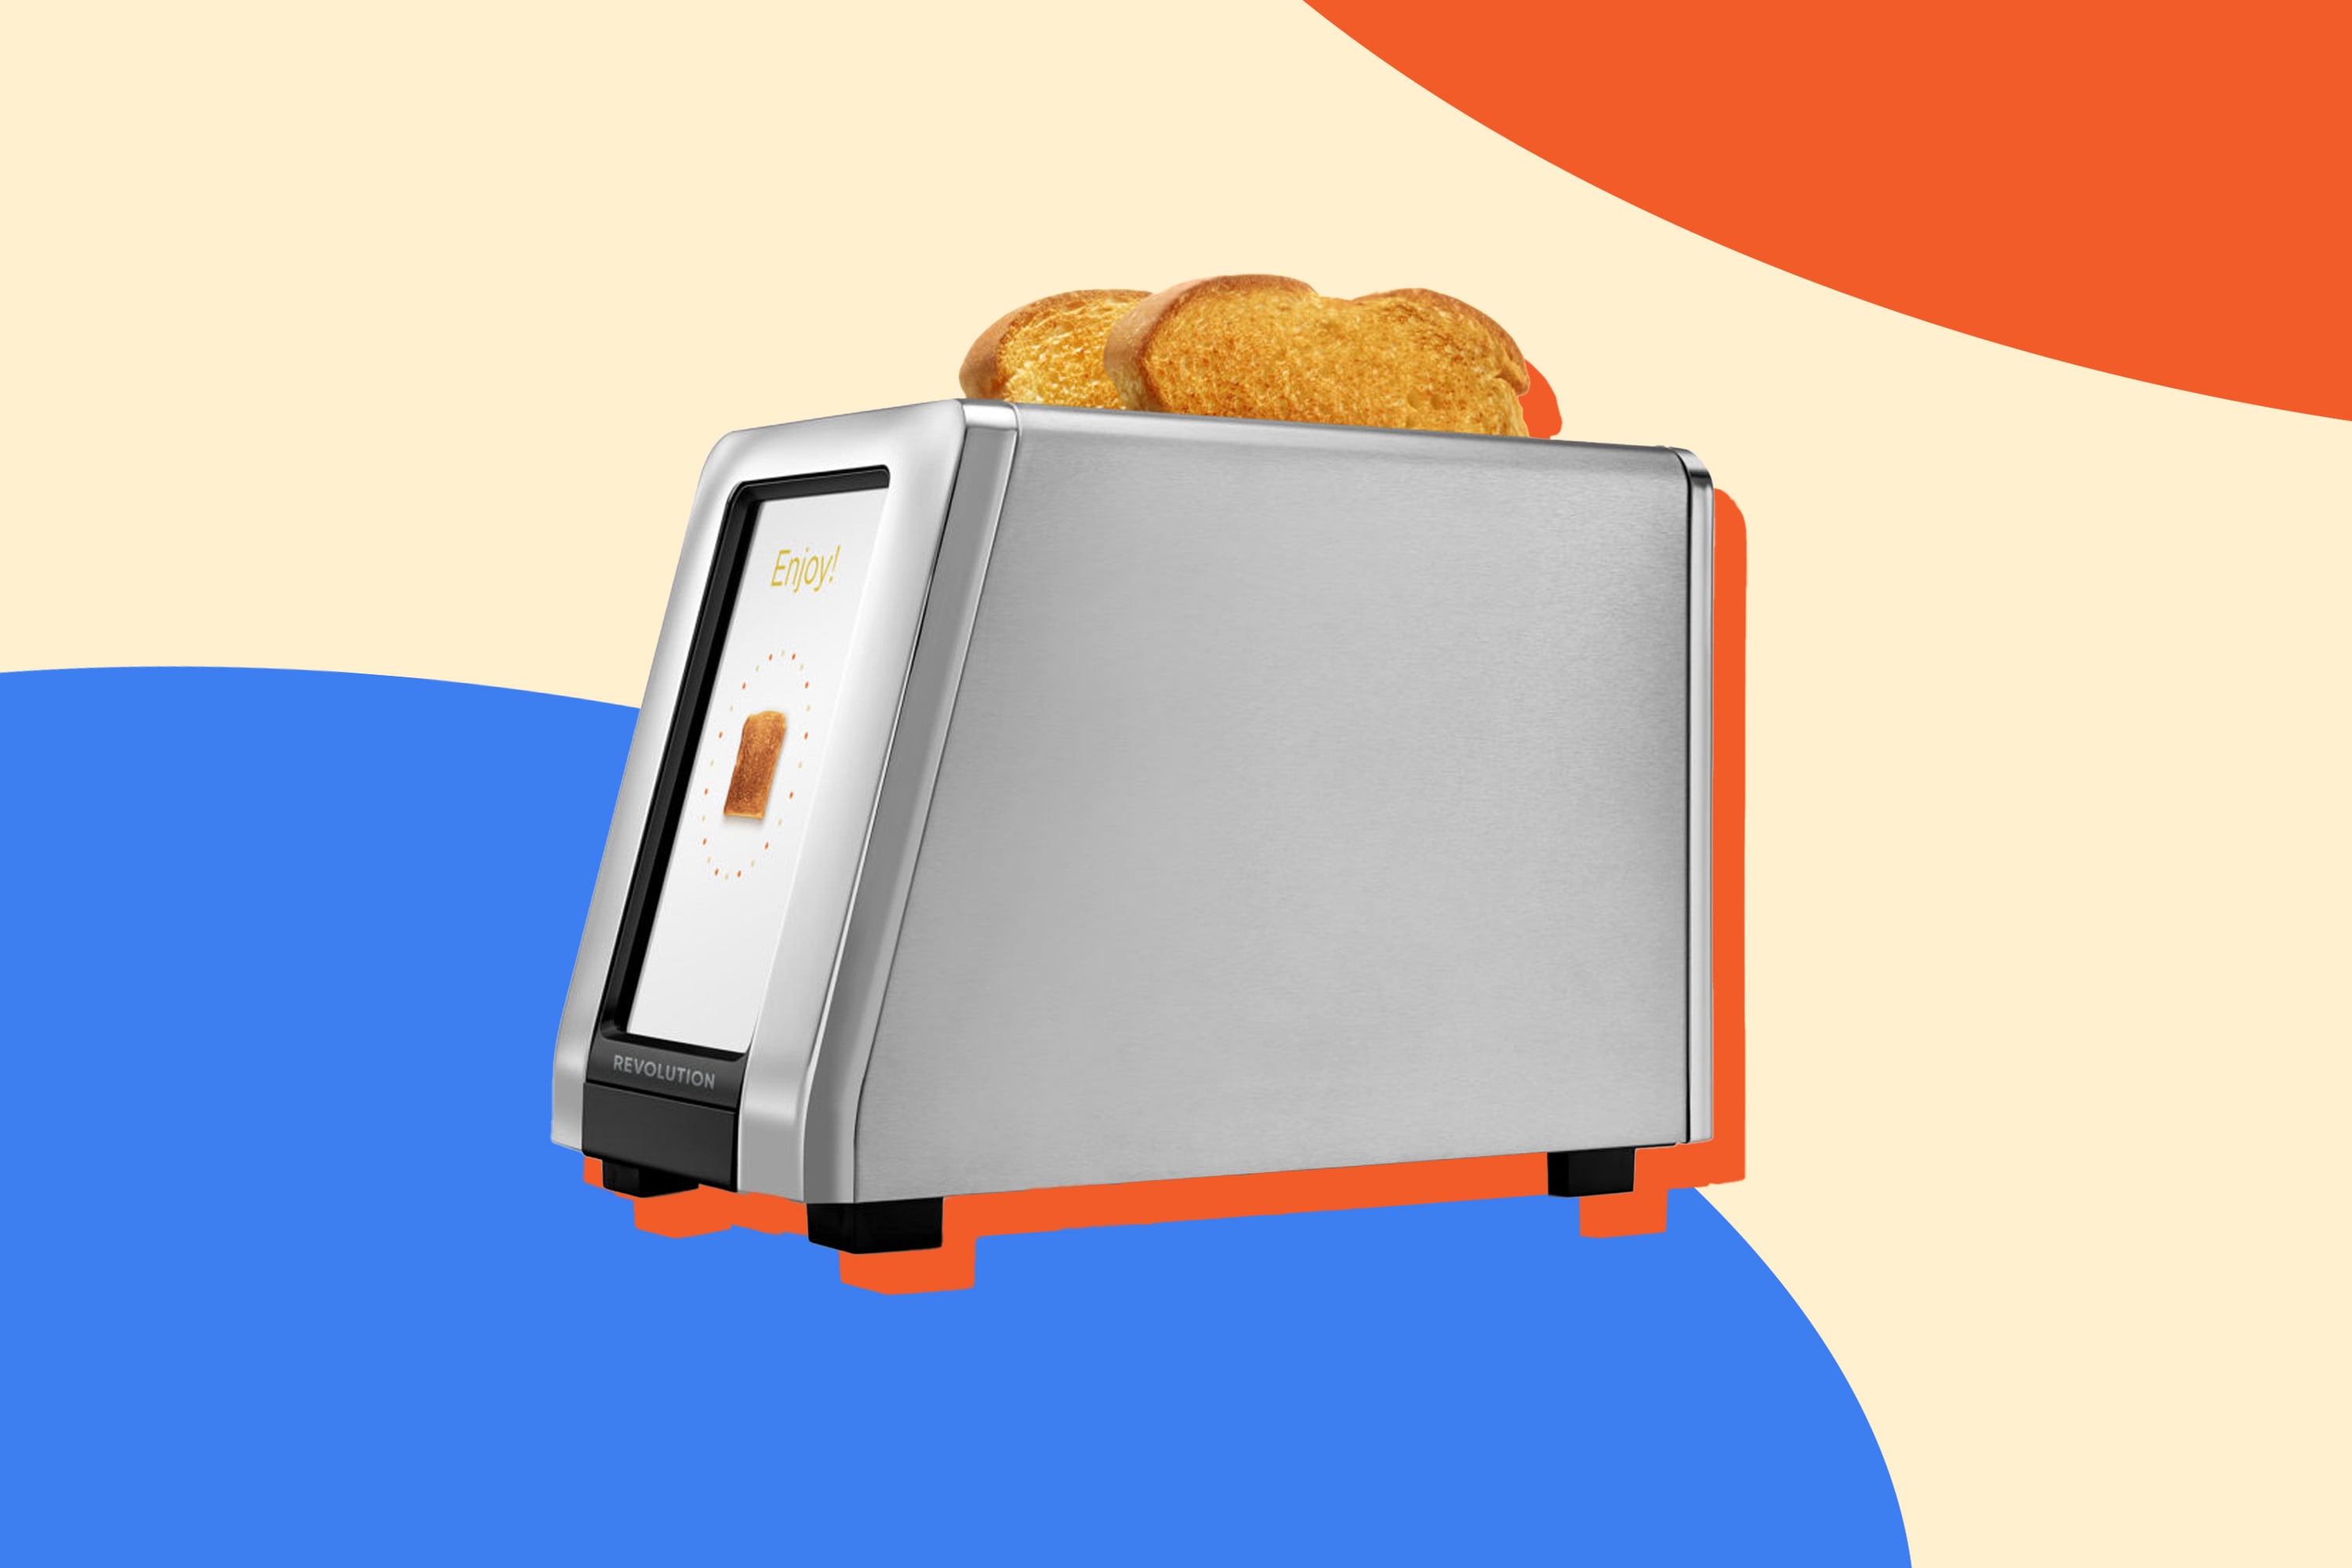 This toaster cost HOW MUCH?? - Revolution InstaGLO R270 Toaster 